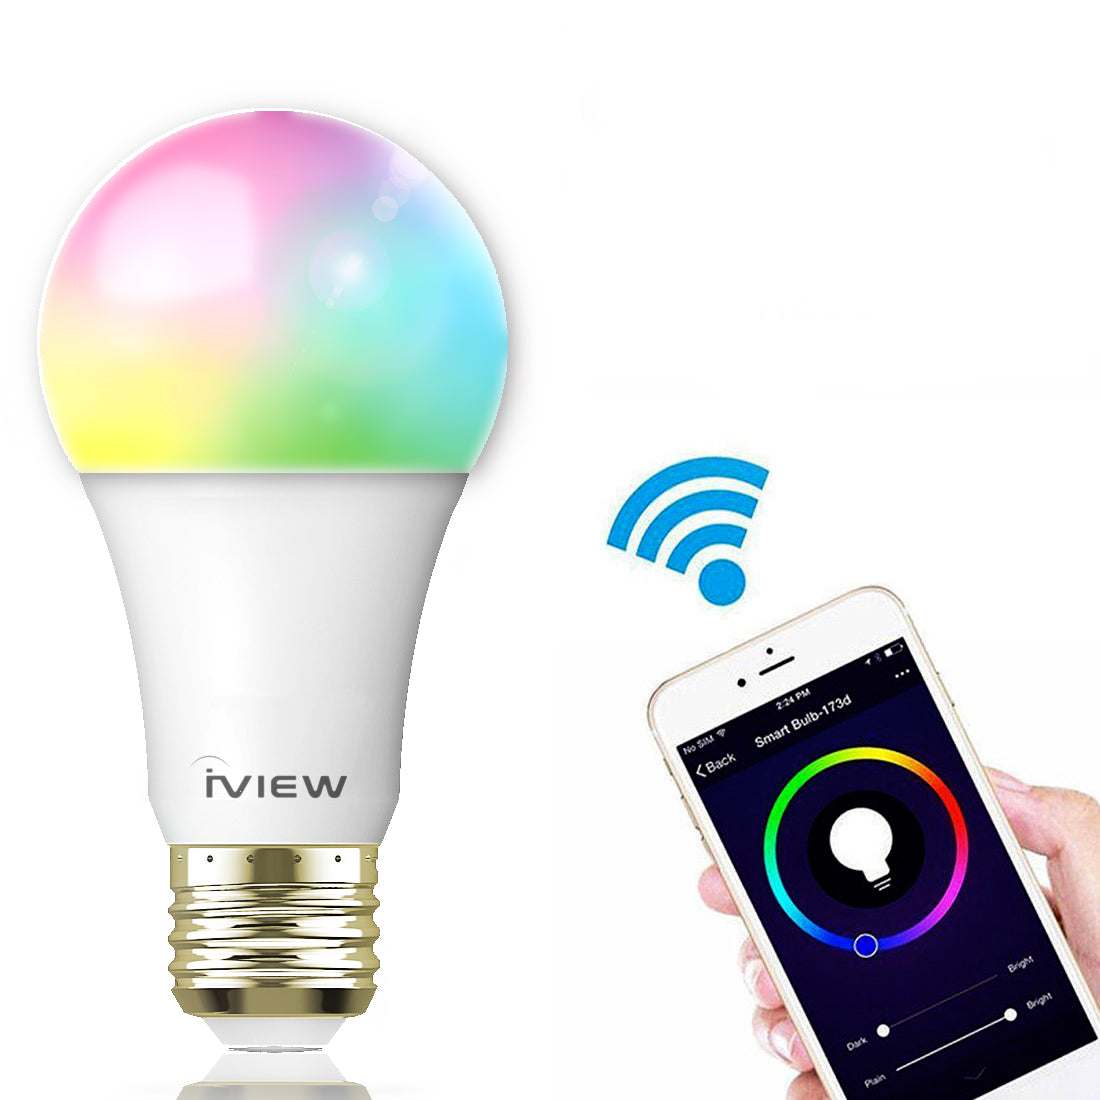 These Multicolor LED Smart Bulbs are $14, and they’re just as good as $50 Philips Hue Bulbs